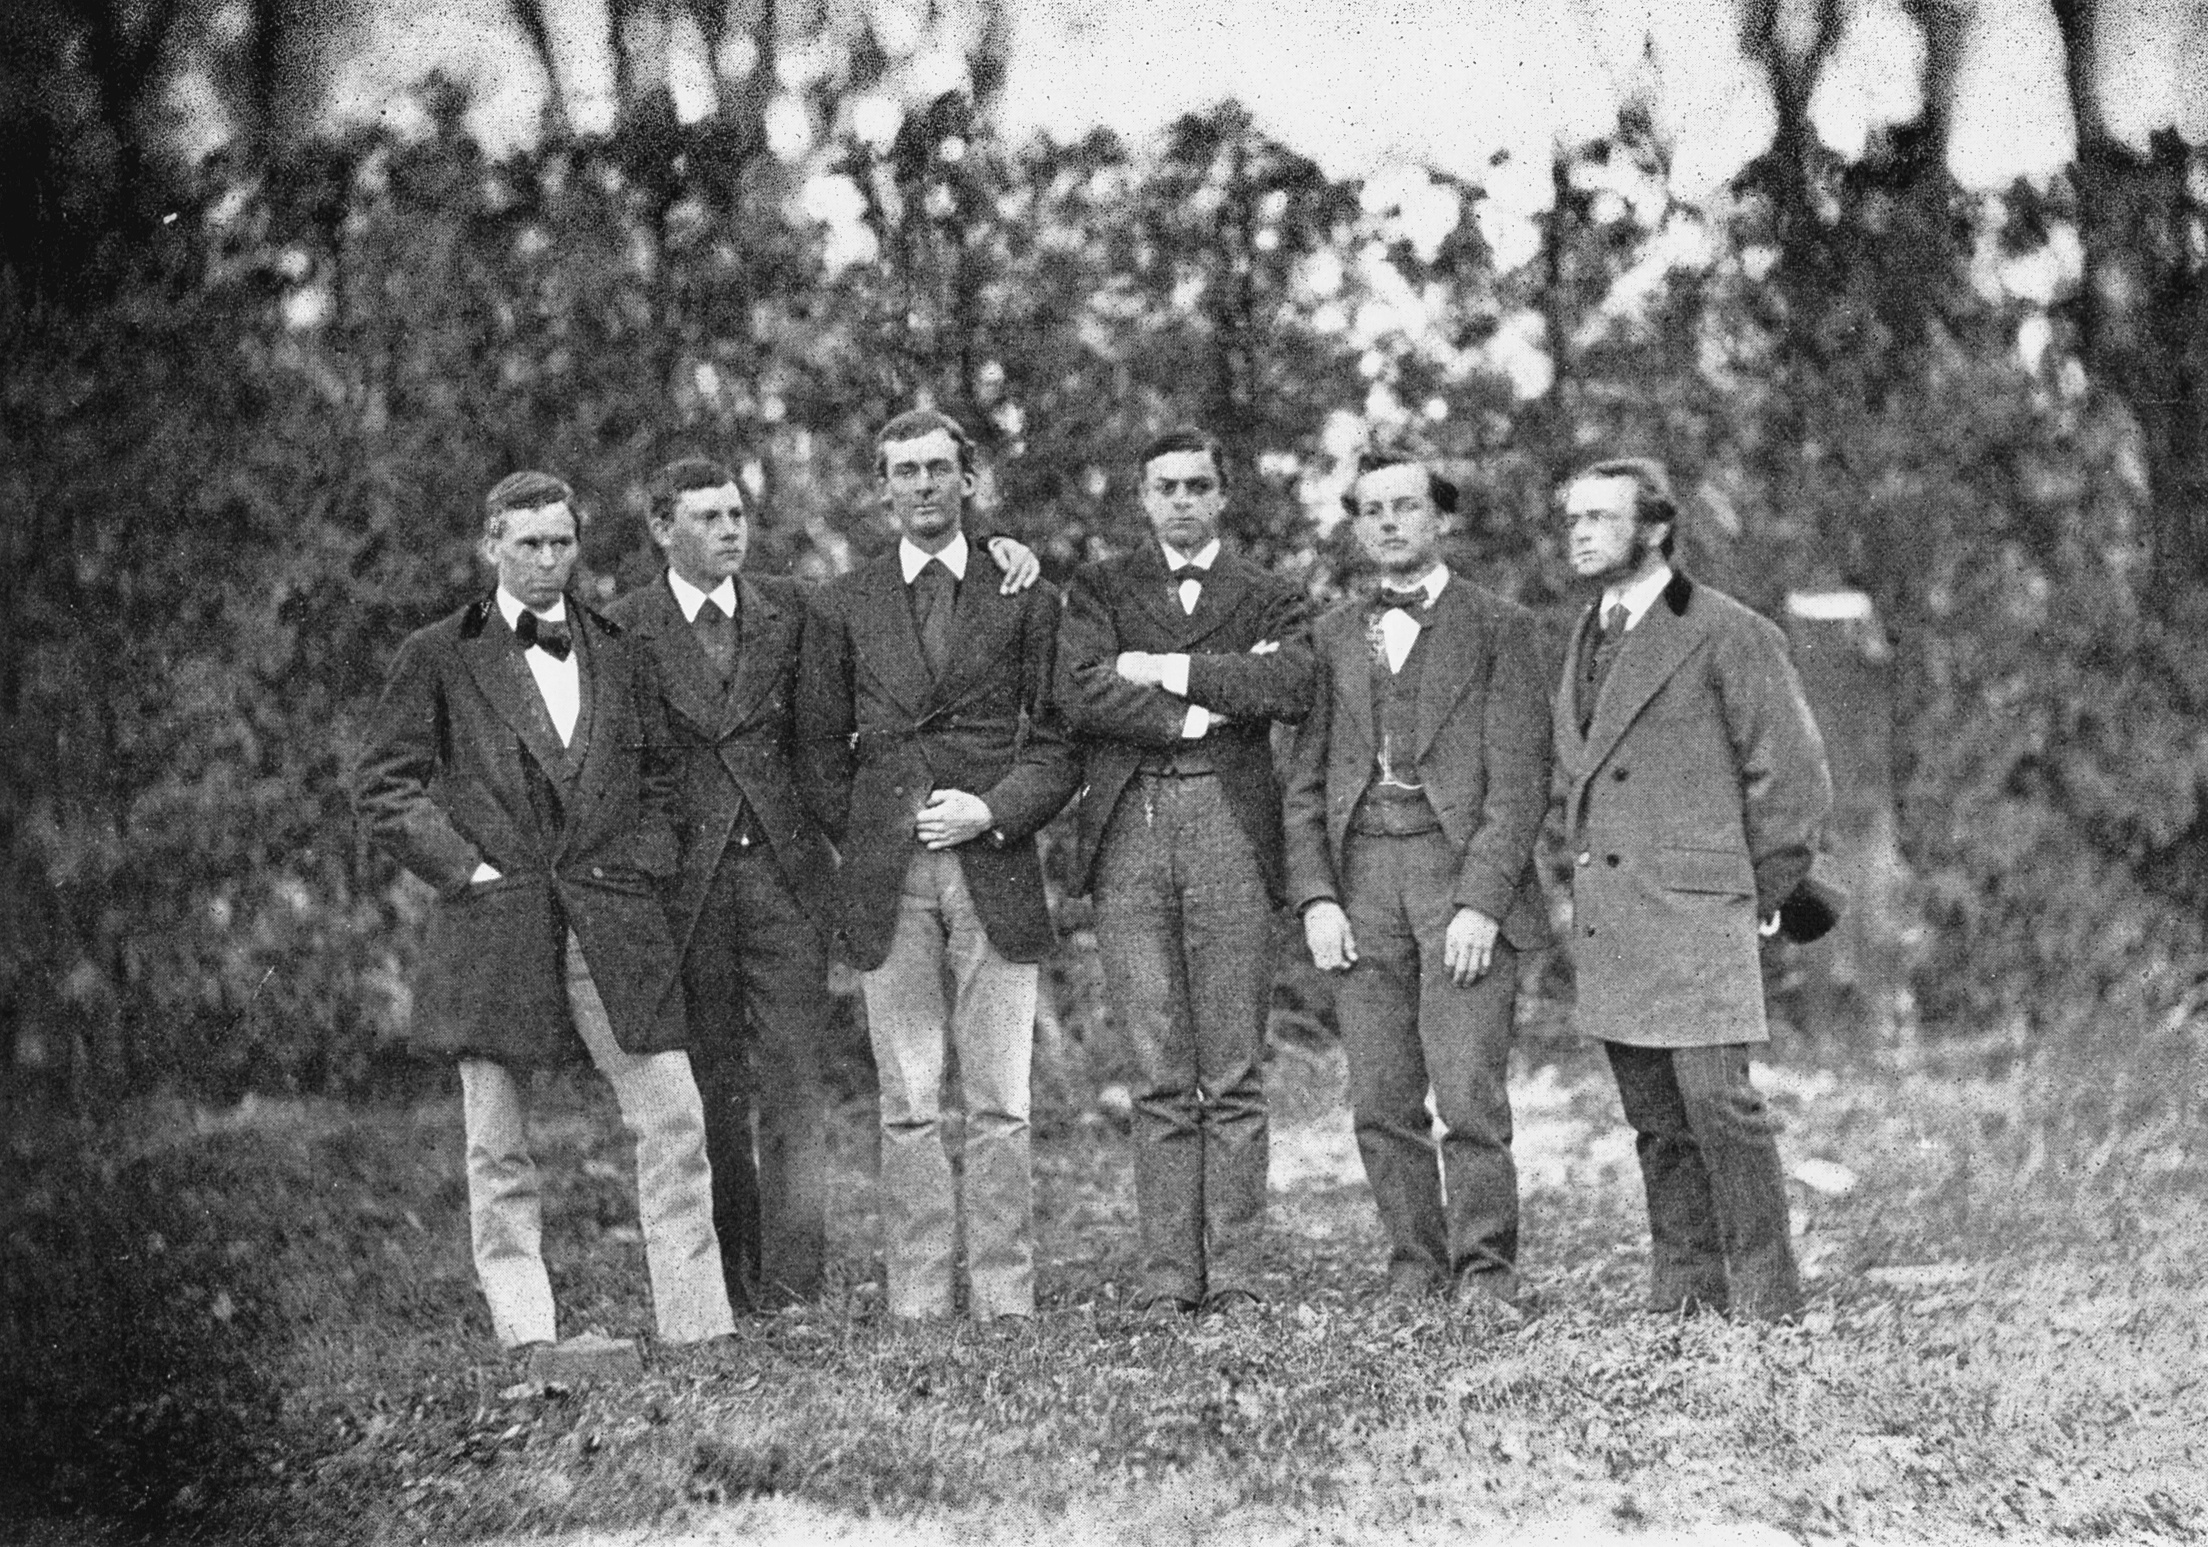 A vintage photo of a group of people posing for the camera